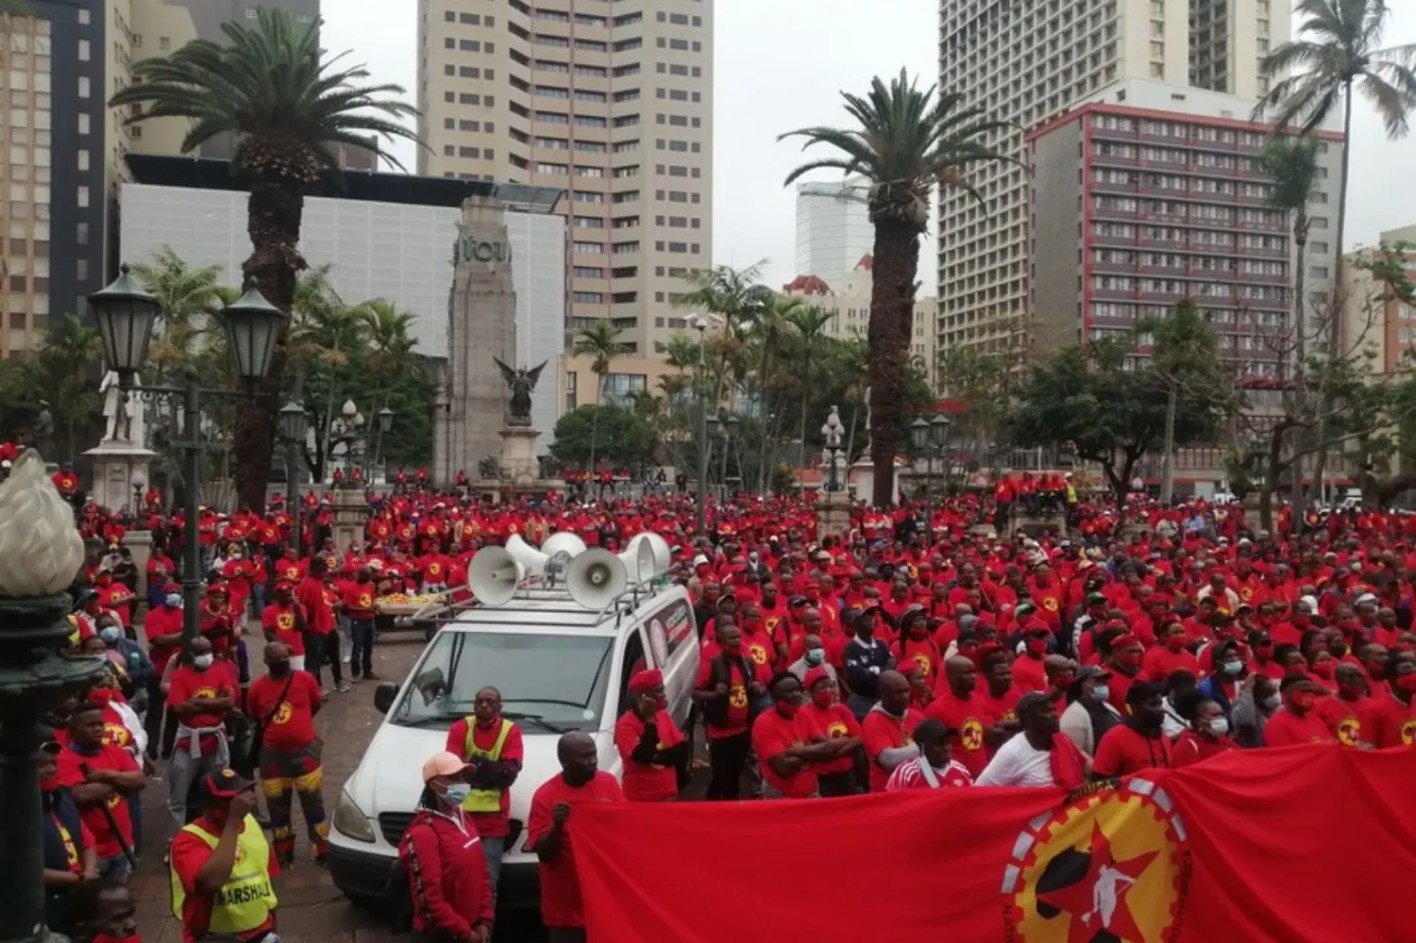 Man dies during Numsa’s countrywide march in Gqeberha